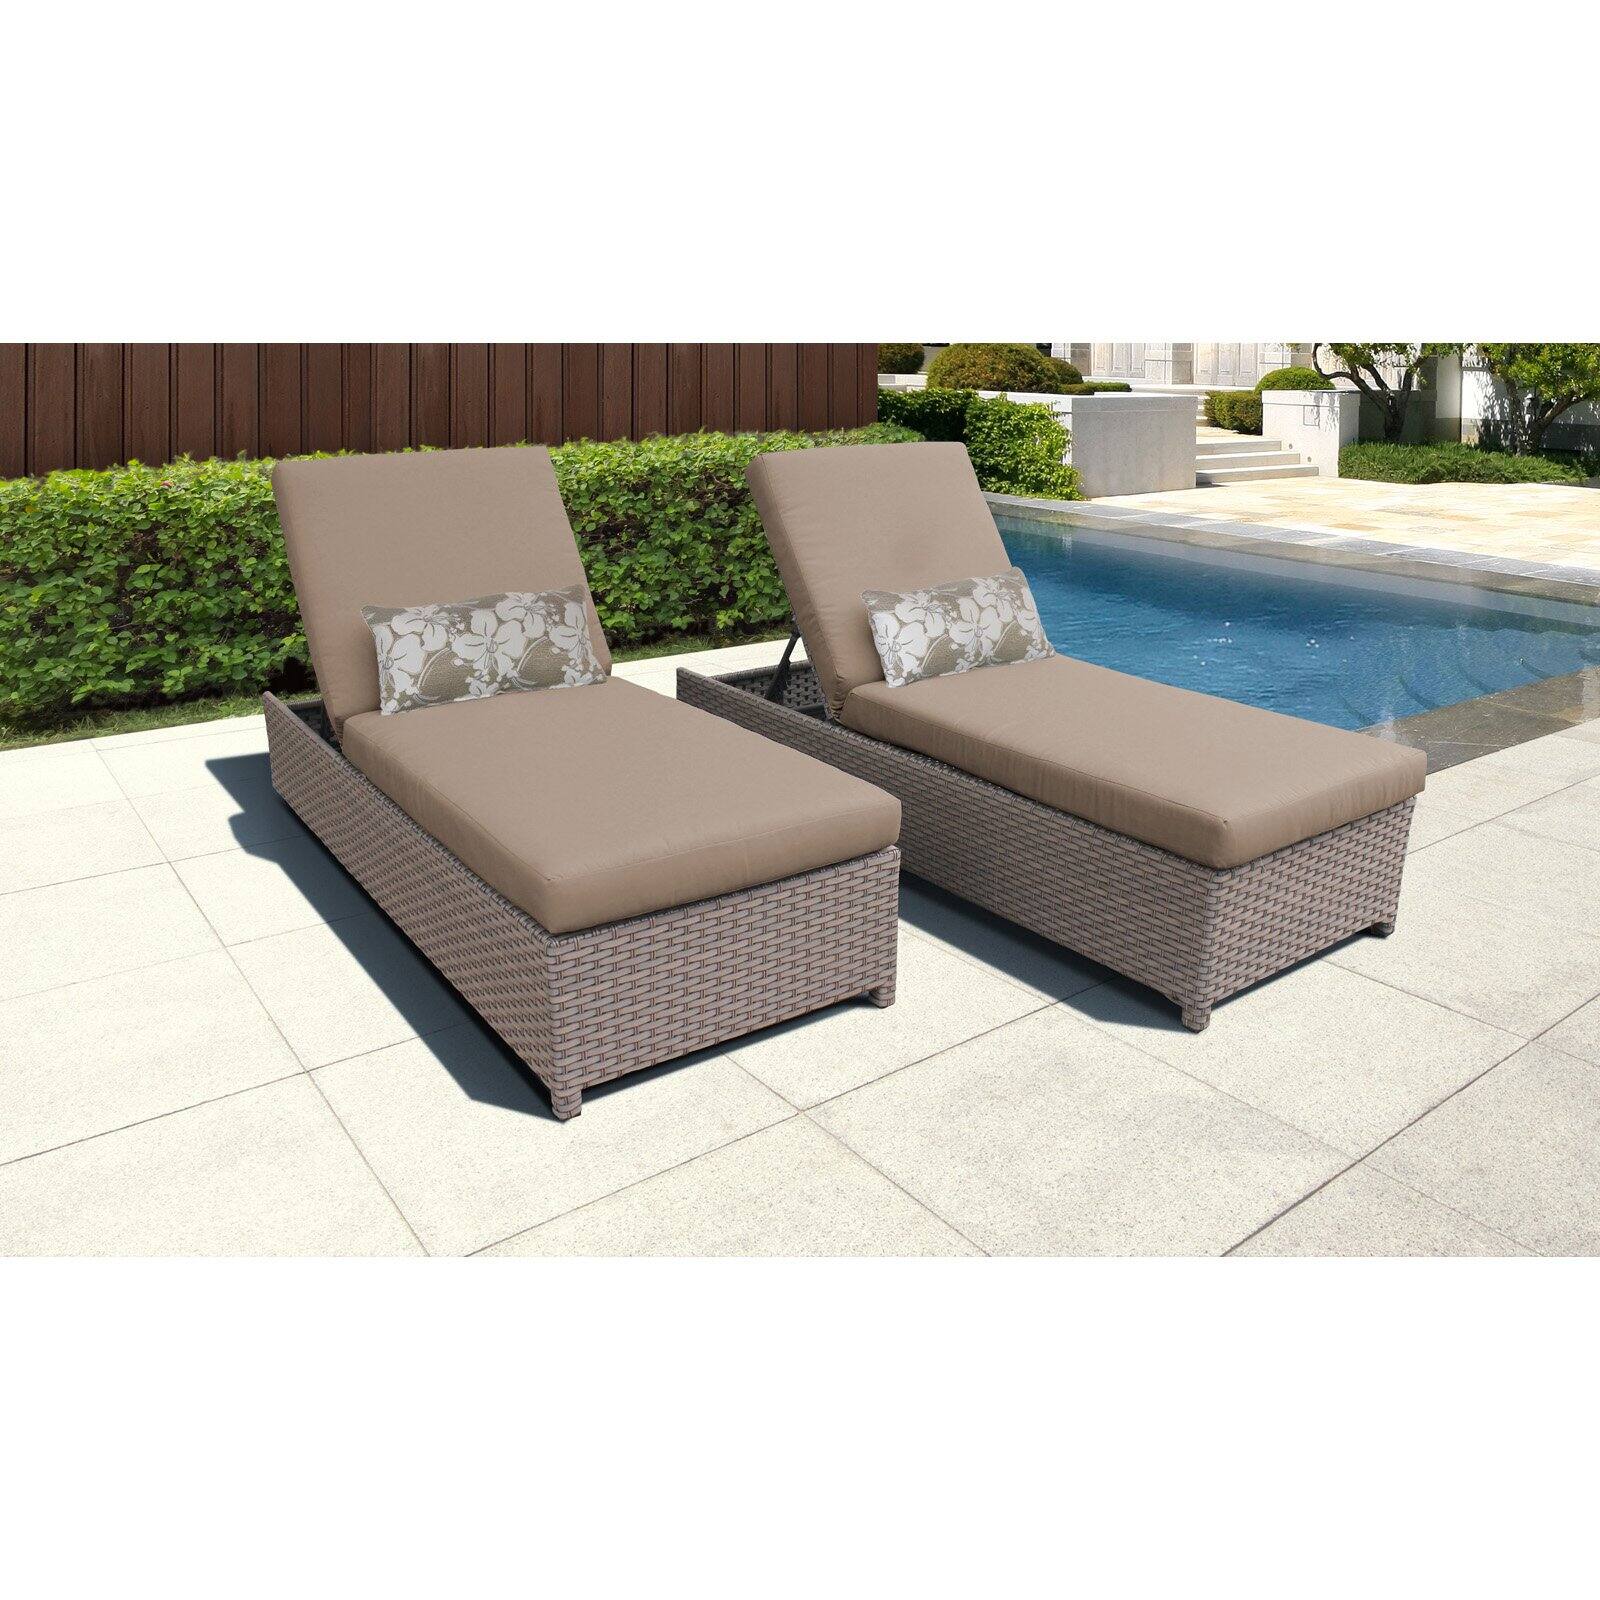 TK Classics Monterey Wheeled Wicker Outdoor Chaise Lounge Chair - Set of 2 - image 3 of 11